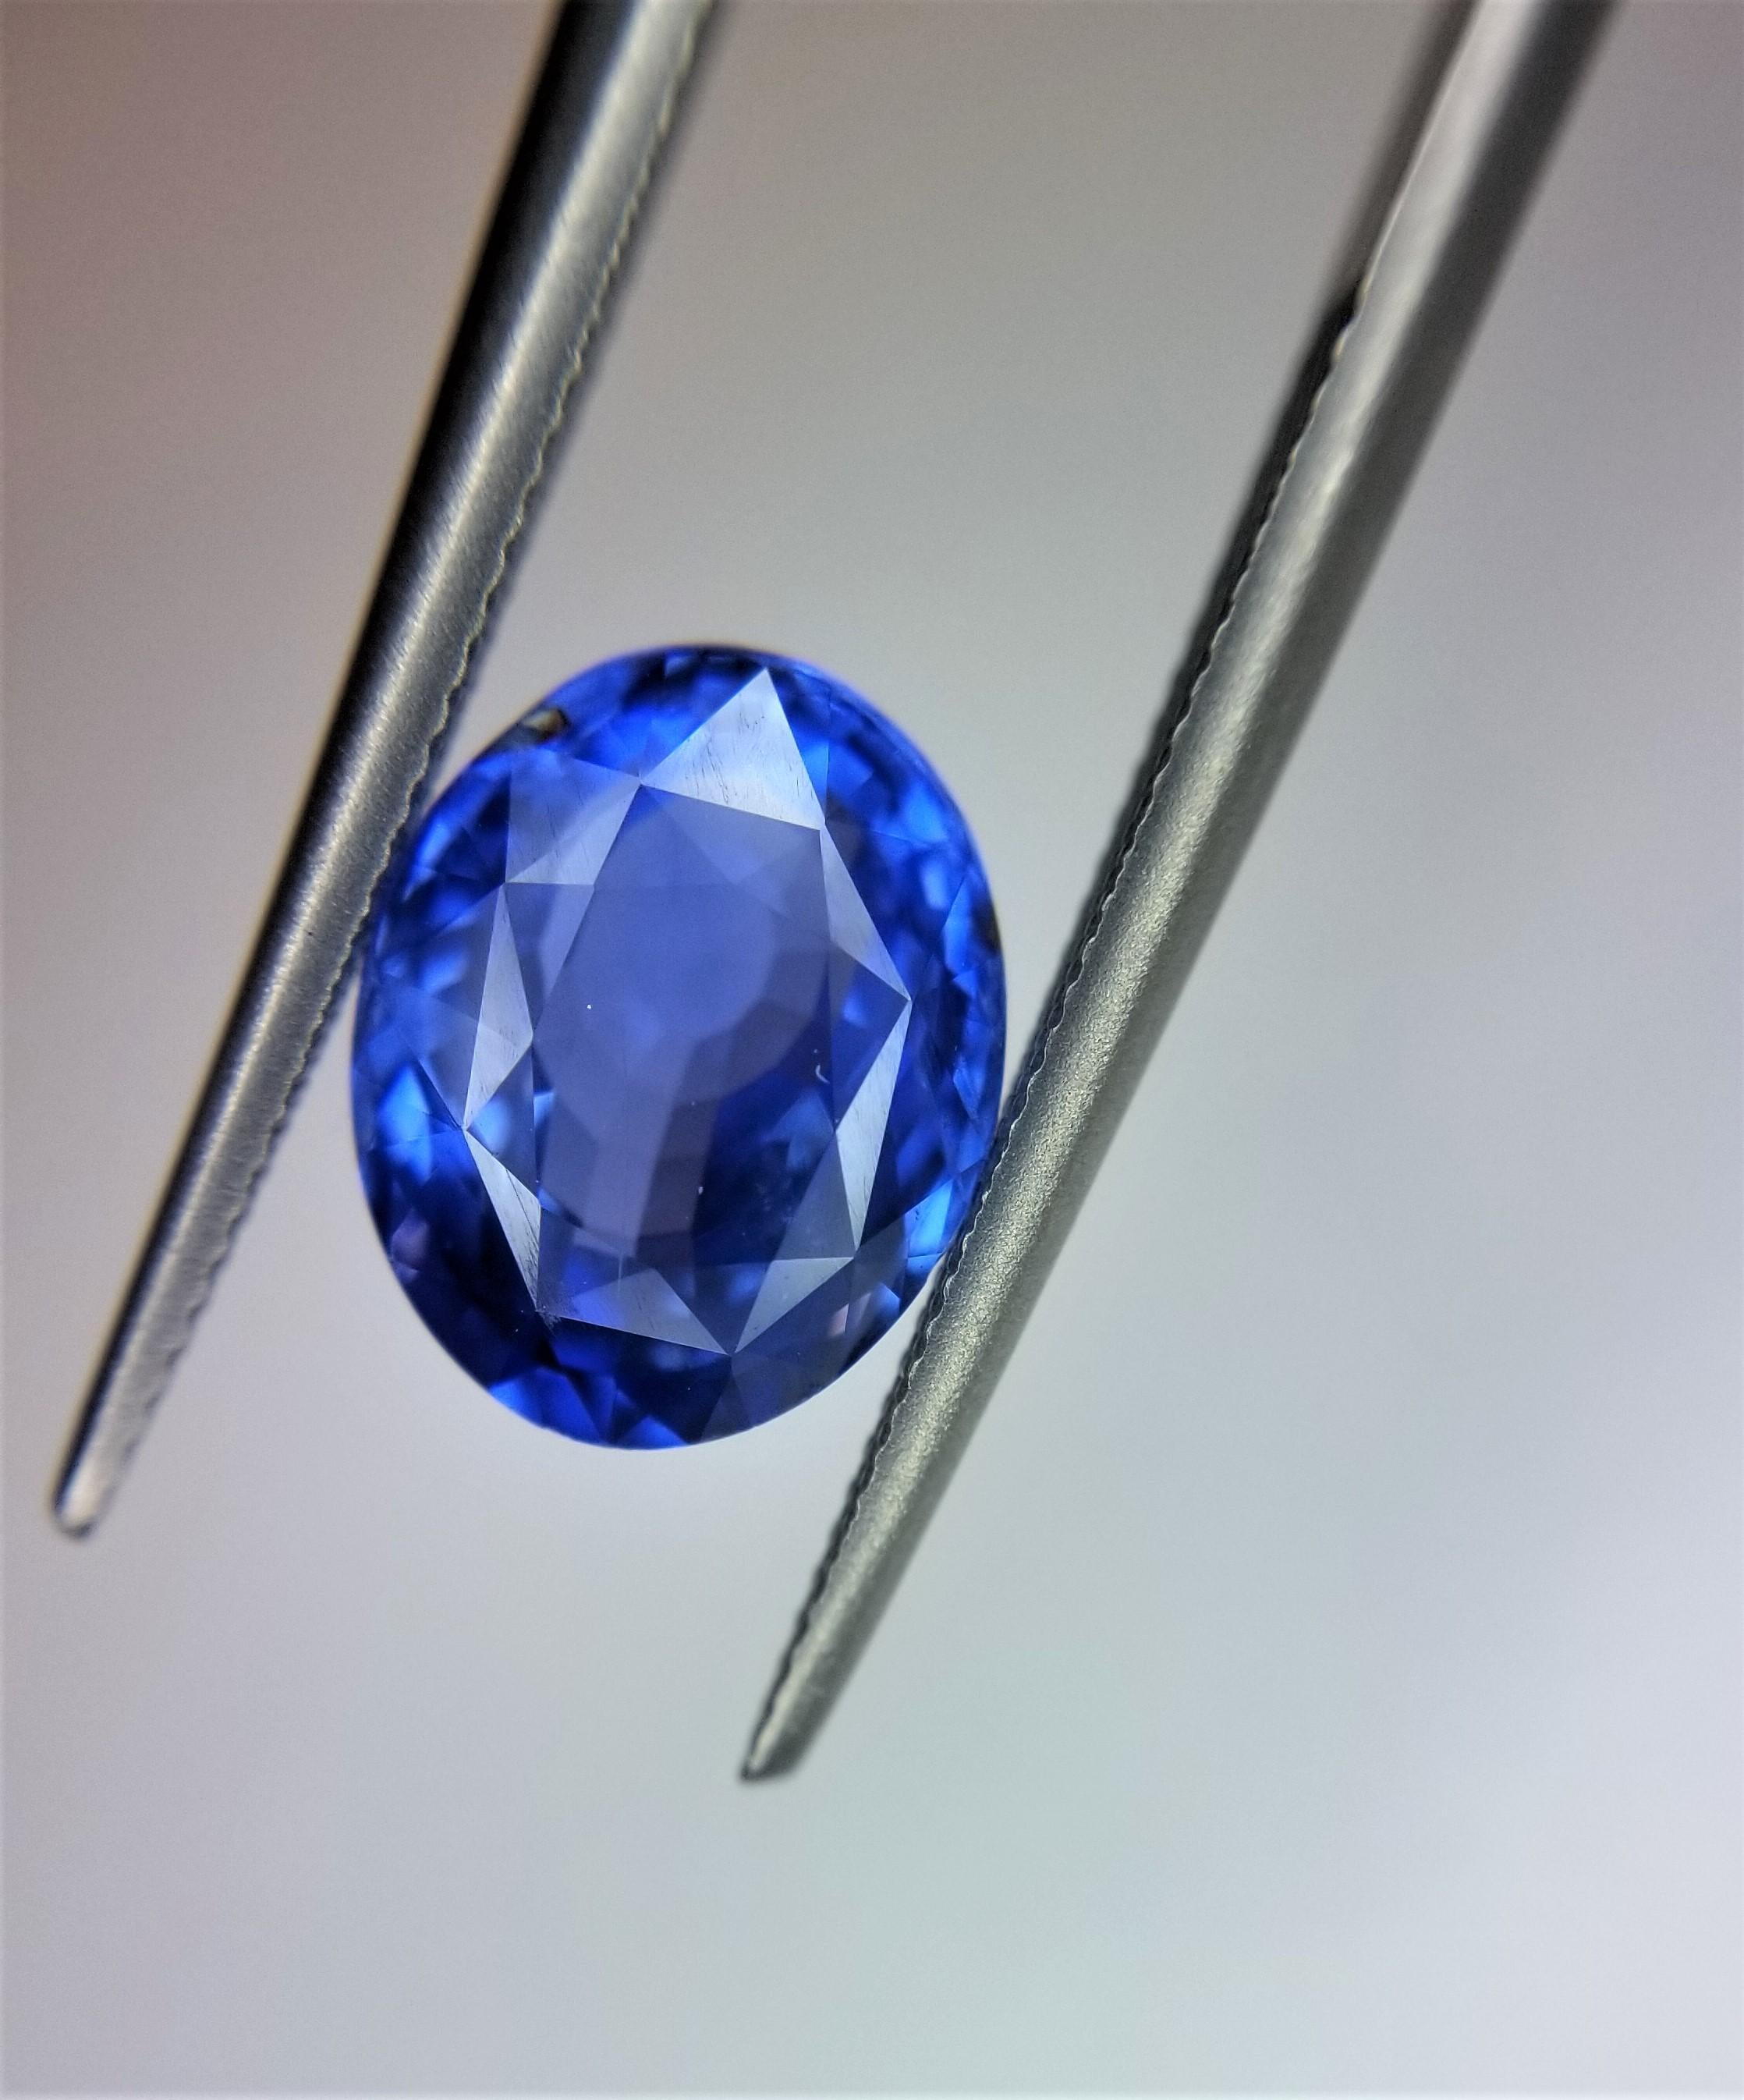 Referred to as the ultimate blue gemstone, we have an amazing selection of beautiful sapphires. If your birthday falls in September, then your birthstone is the celestial sapphire. For centuries, the sapphire has been referred to as the ultimate